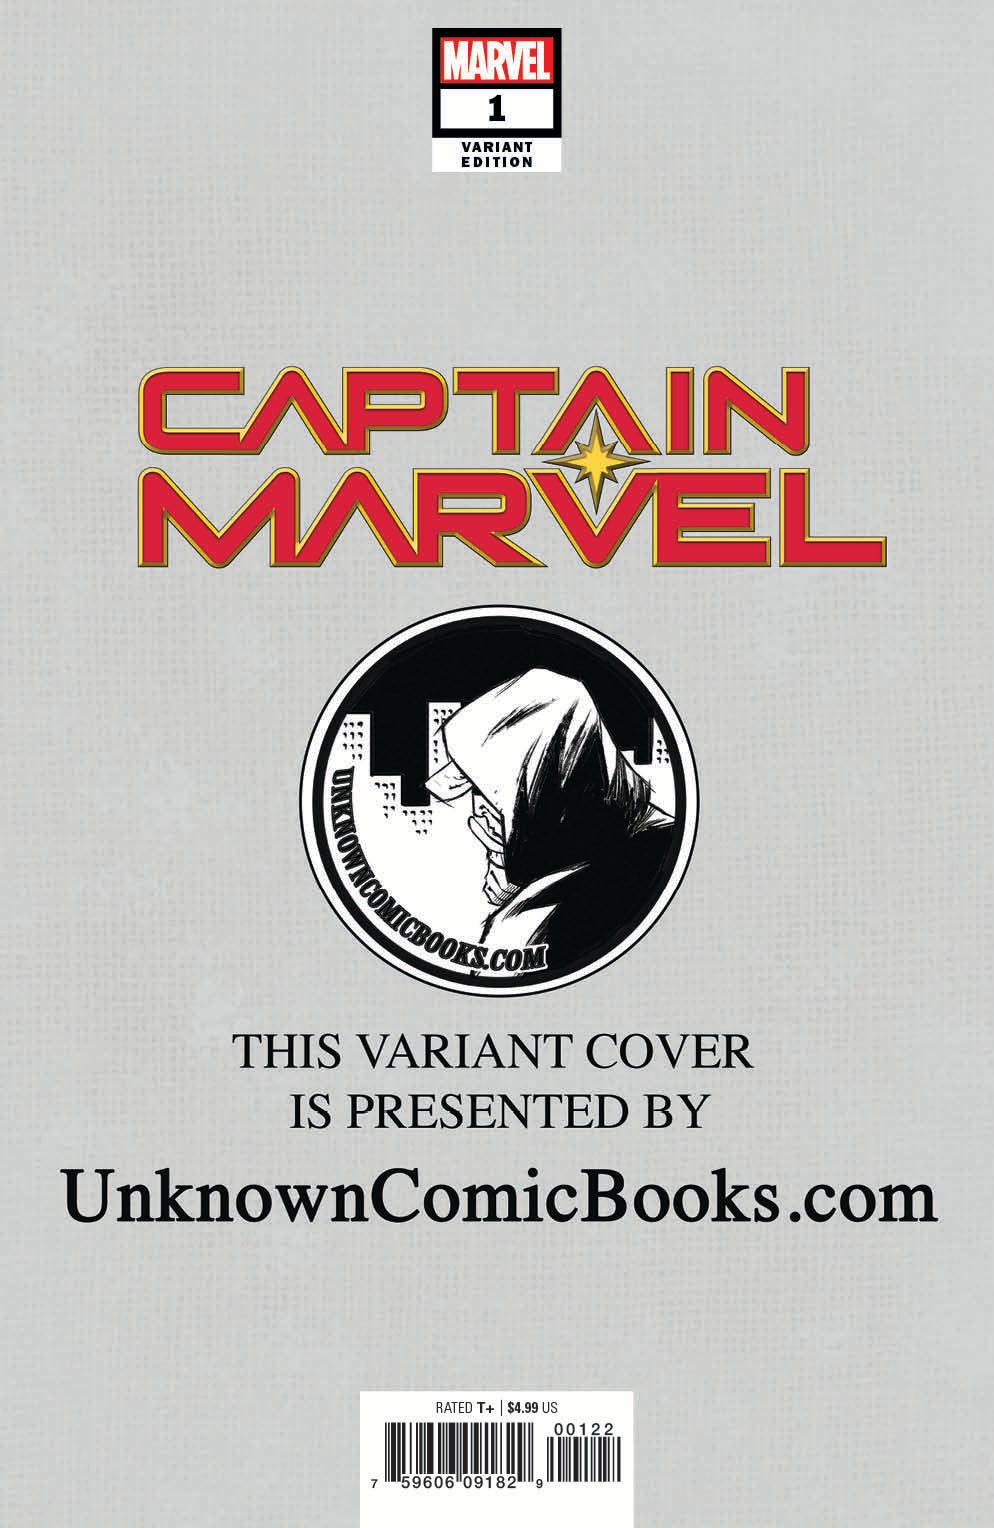 CAPTAIN MARVEL #1 UNKNOWN COMIC BOOKS EXCLUSIVE ANACLETO CVR A 1/9/2019